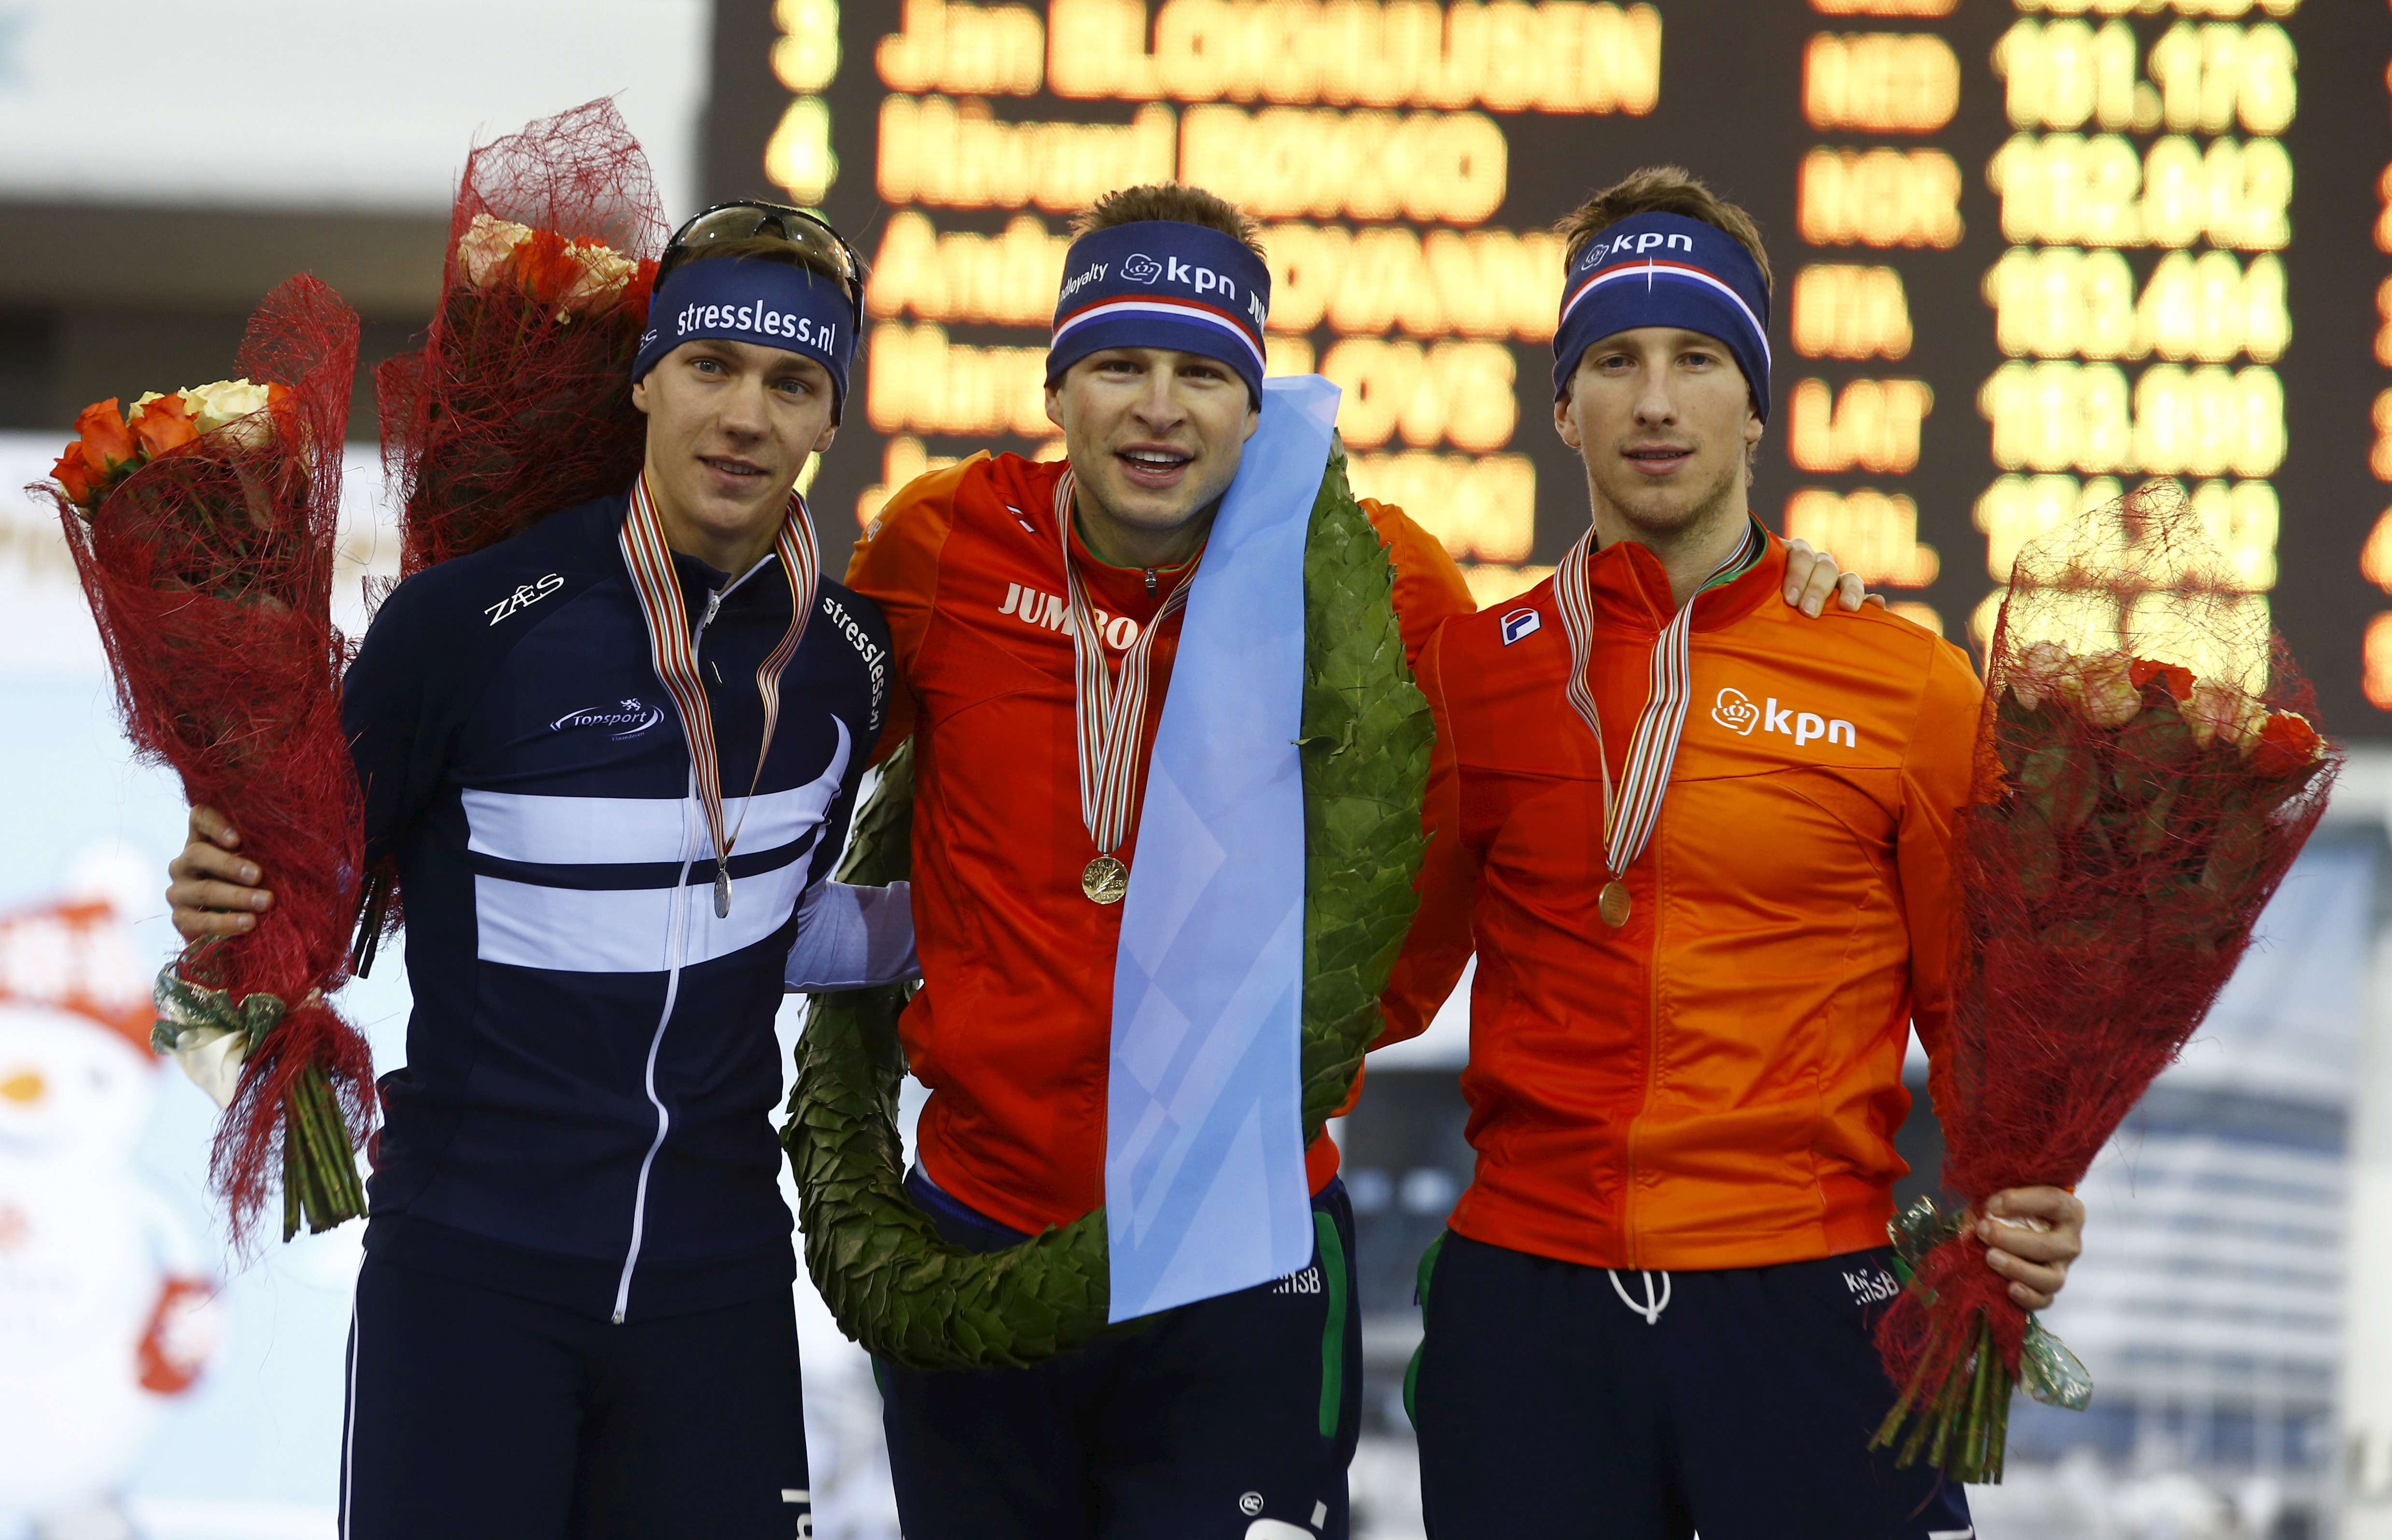 The Netherlands' Kramer, who won first place, Belgium's Swings, in second place and the Netherlands' Blockhuijsen, in third place in the final classification men, pose for a photo after the award ceremony during ISU European Speed Skating Championshi